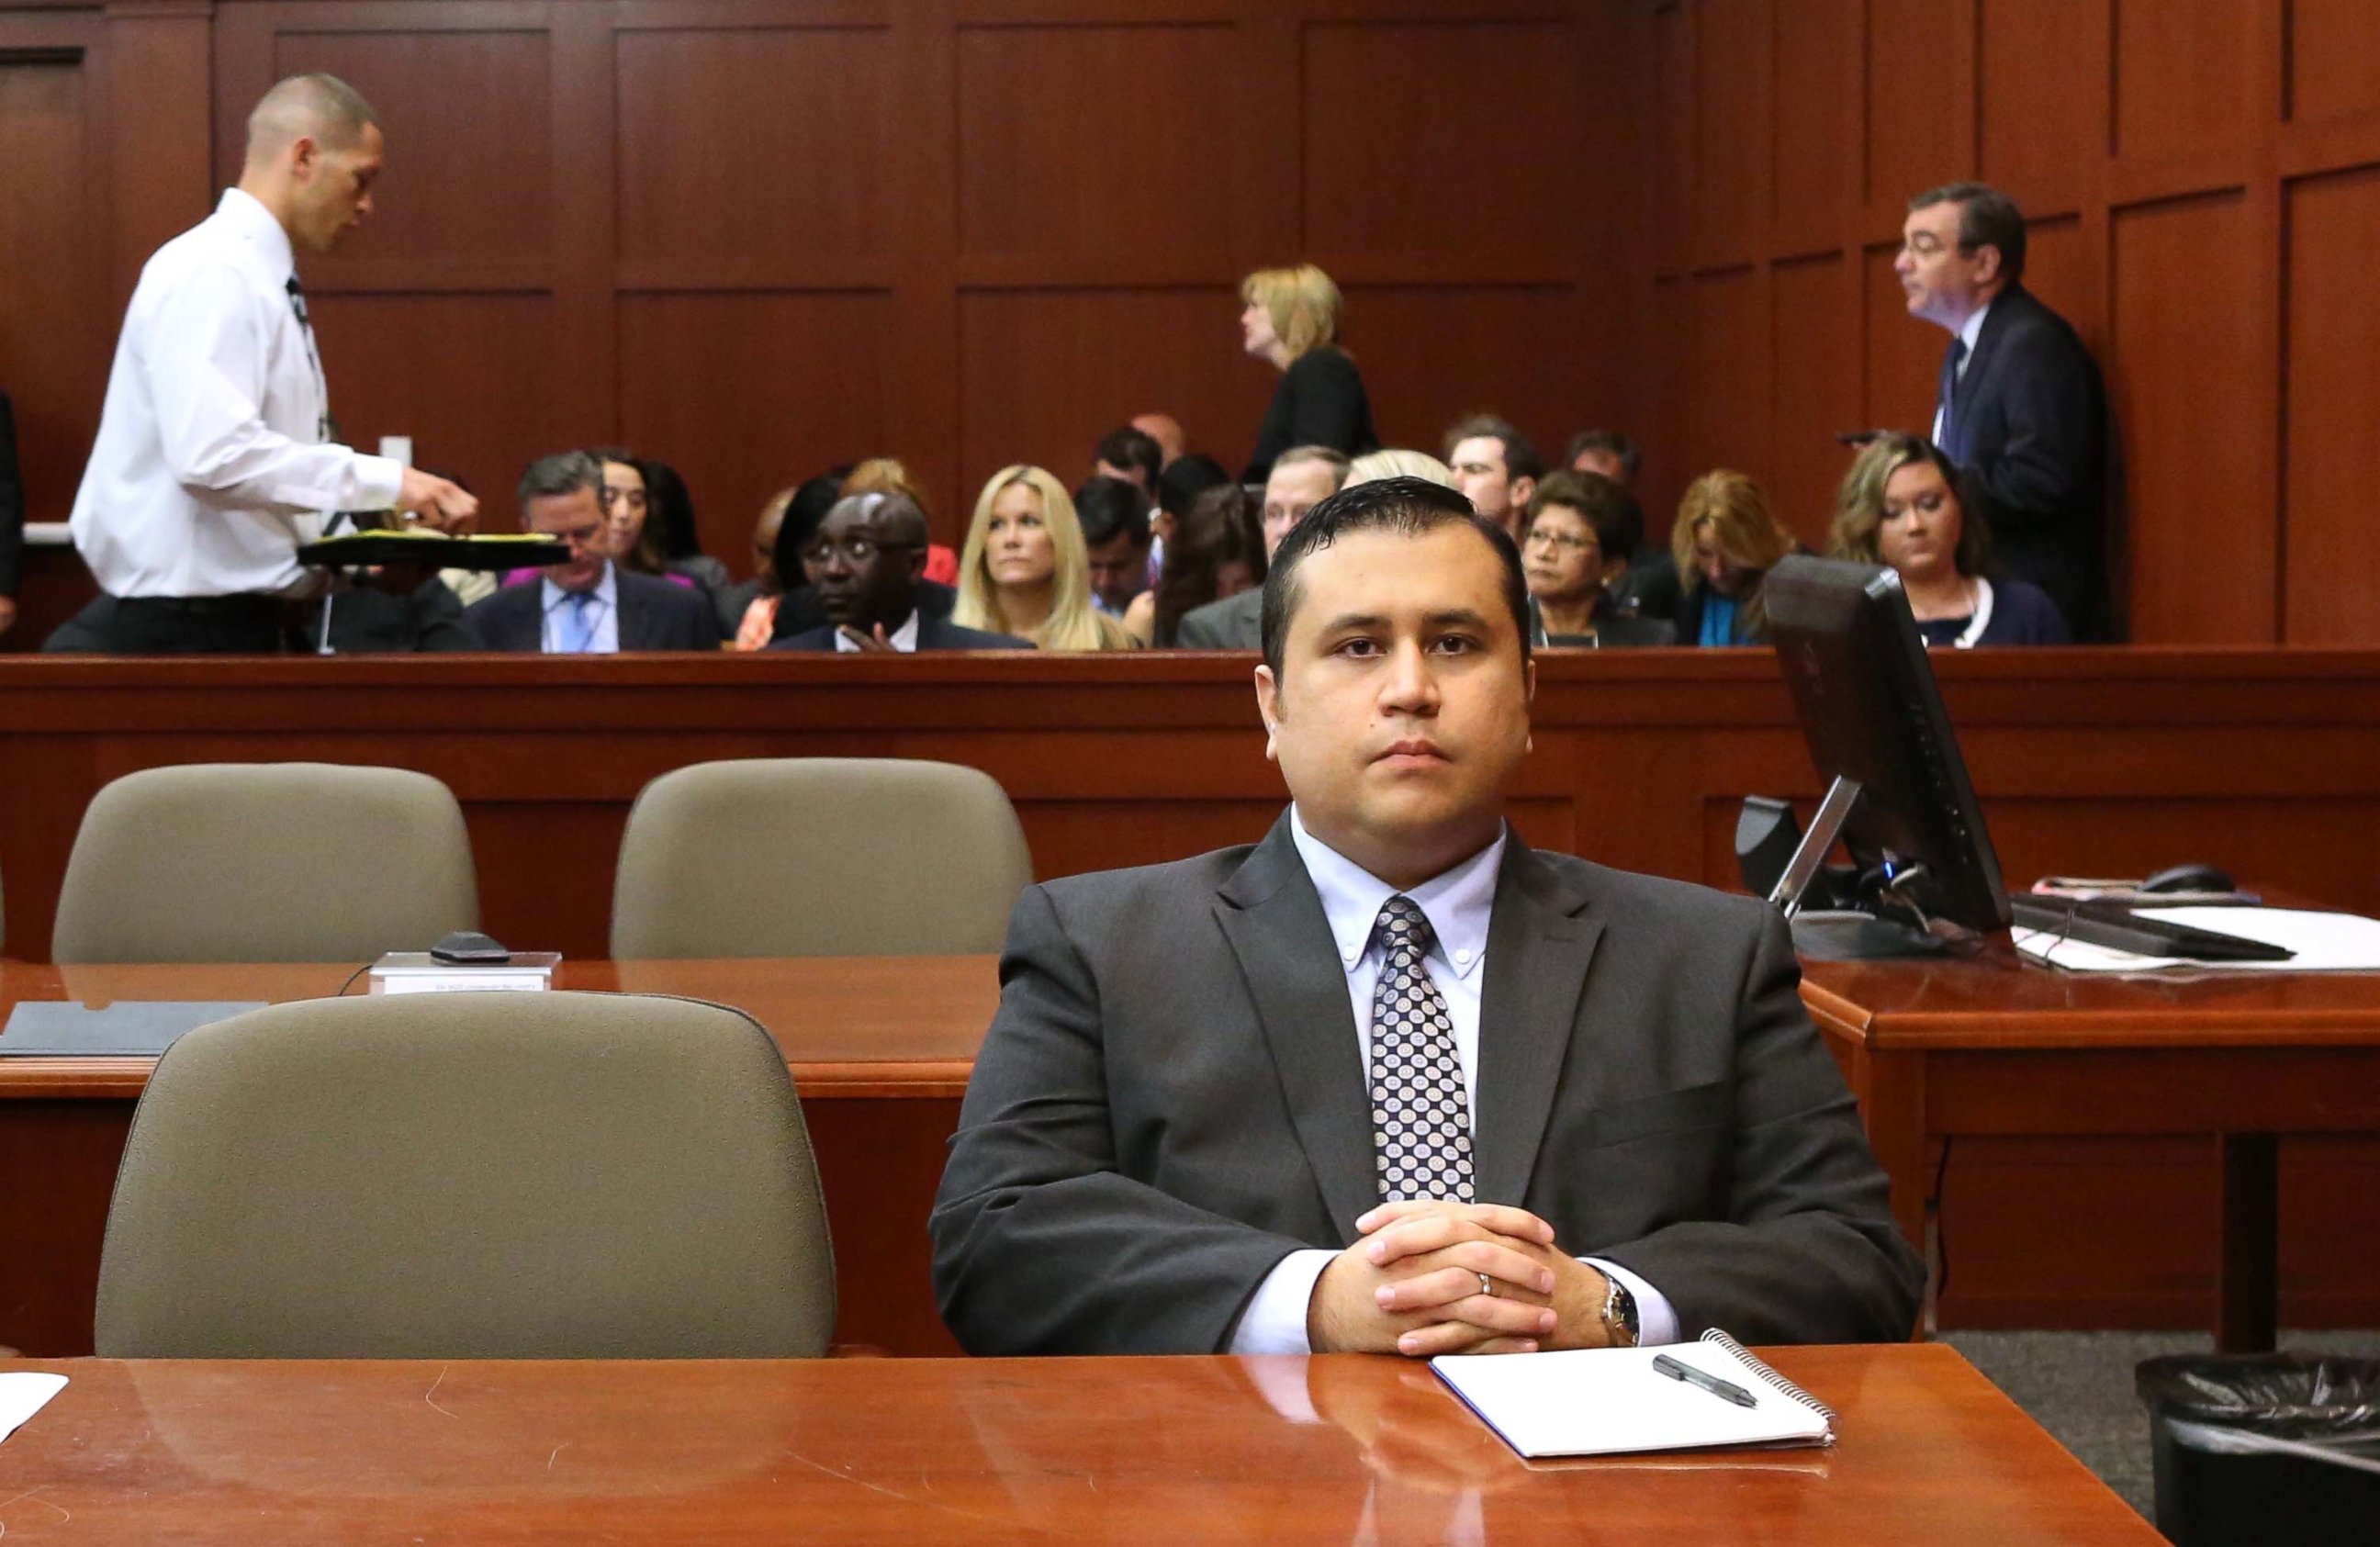 PHOTO: George Zimmerman waits for his defense counsel to arrive in Seminole circuit court, on the 11th day of his murder trial in the 2012 death of Trayvon Martin, June 24, 2013, in Sanford, Fla.